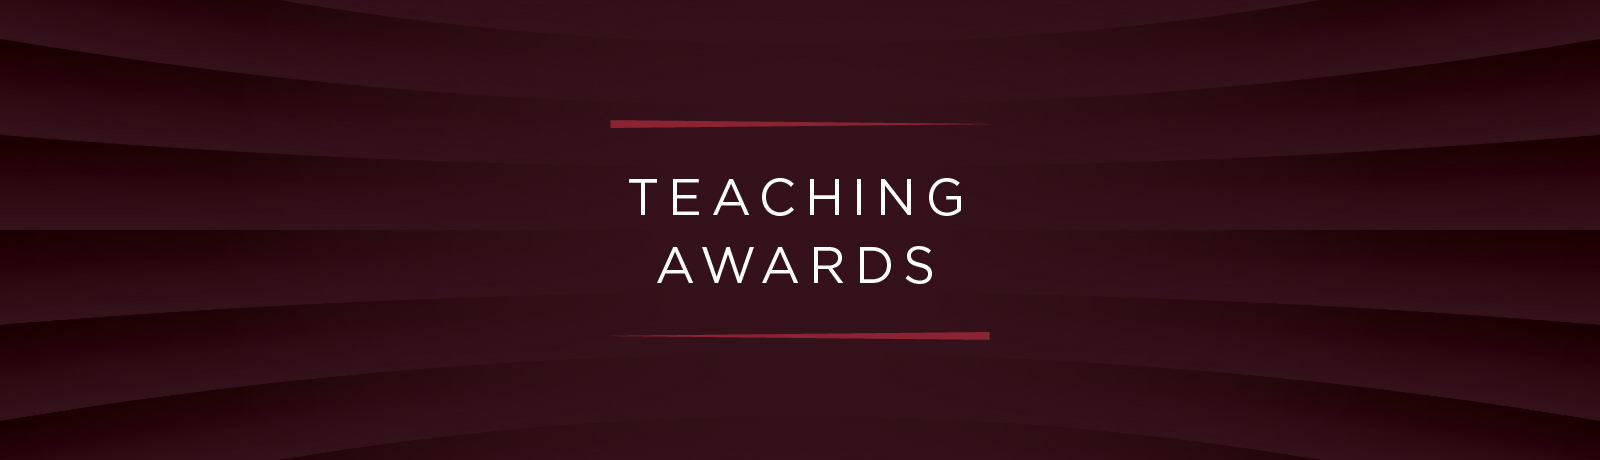 A graphic that says "Teaching Awards" over a maroon background.